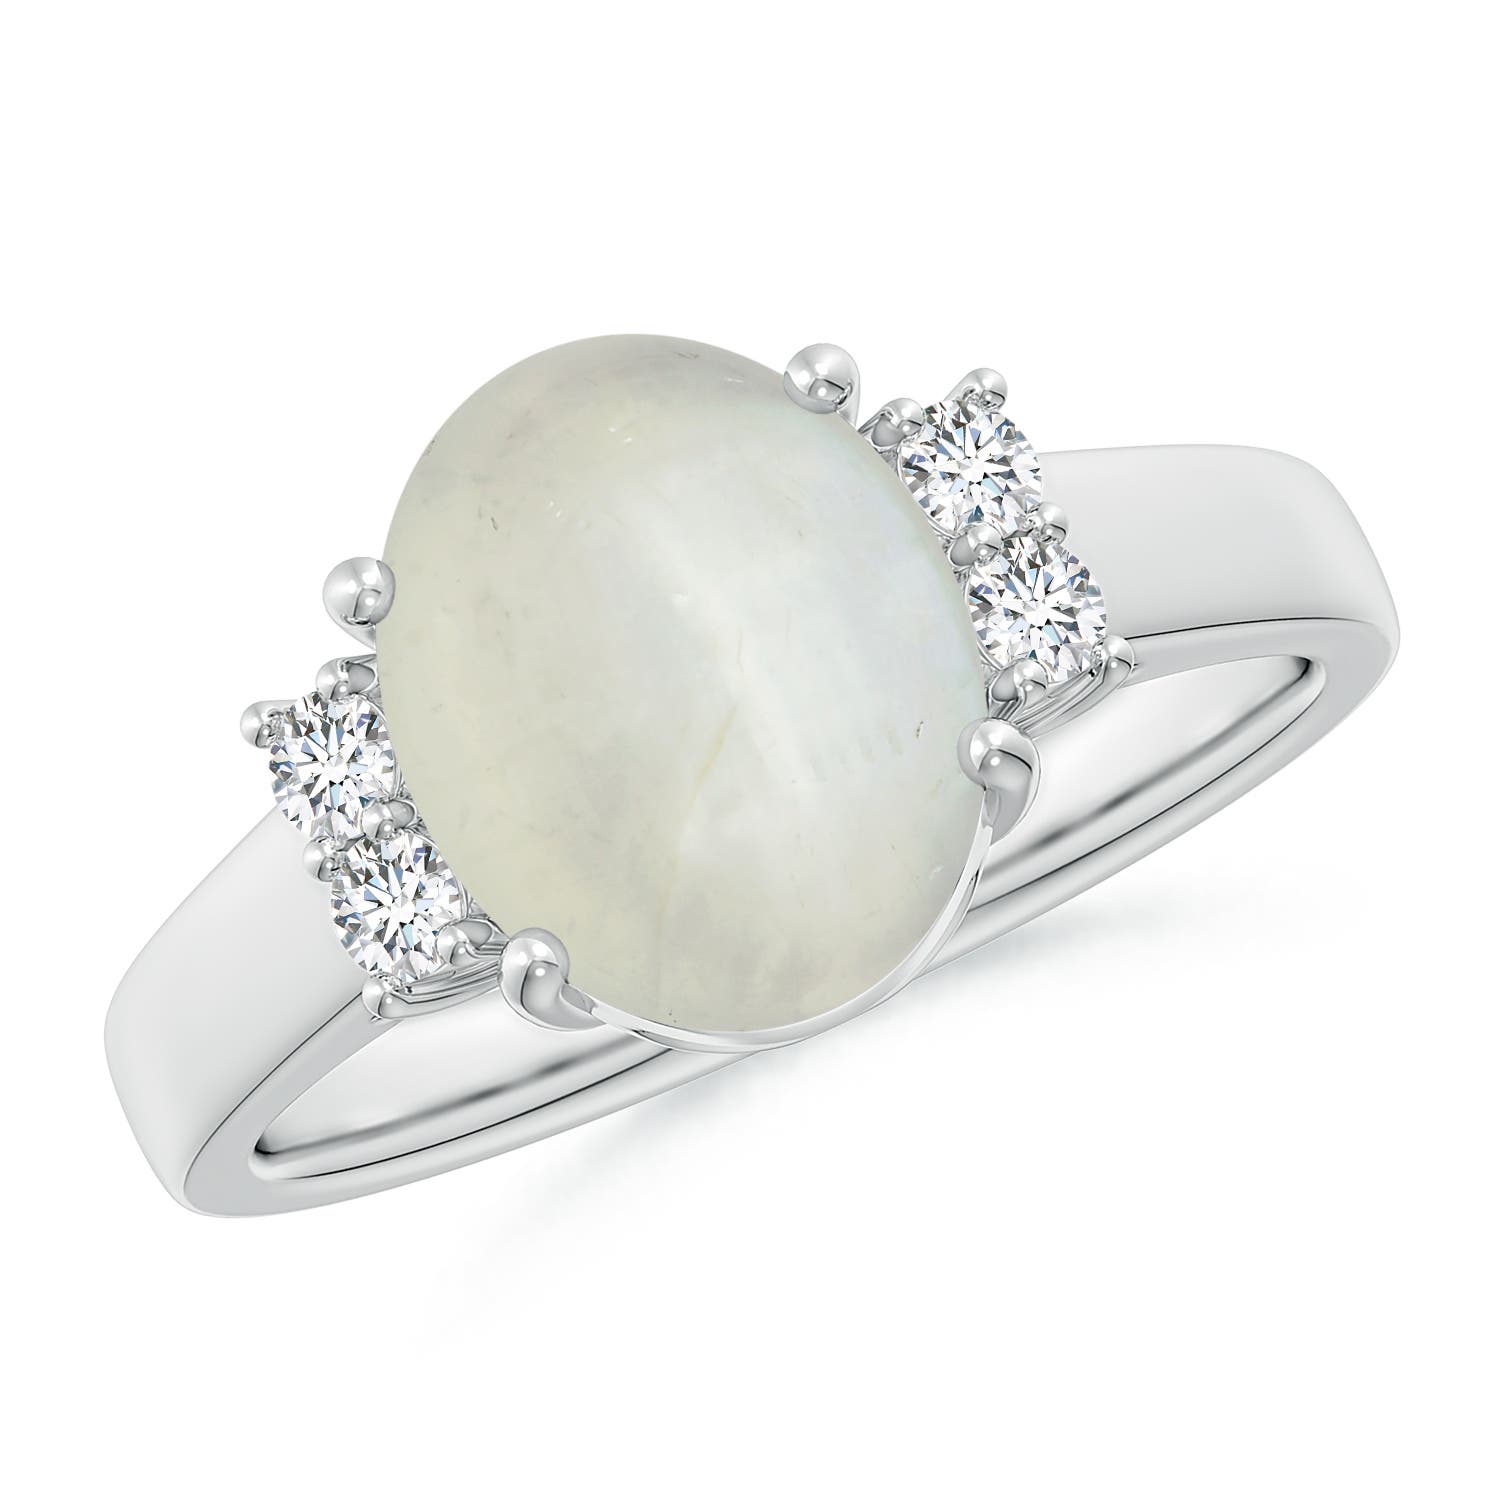 AA - Moonstone / 2.66 CT / 14 KT White Gold